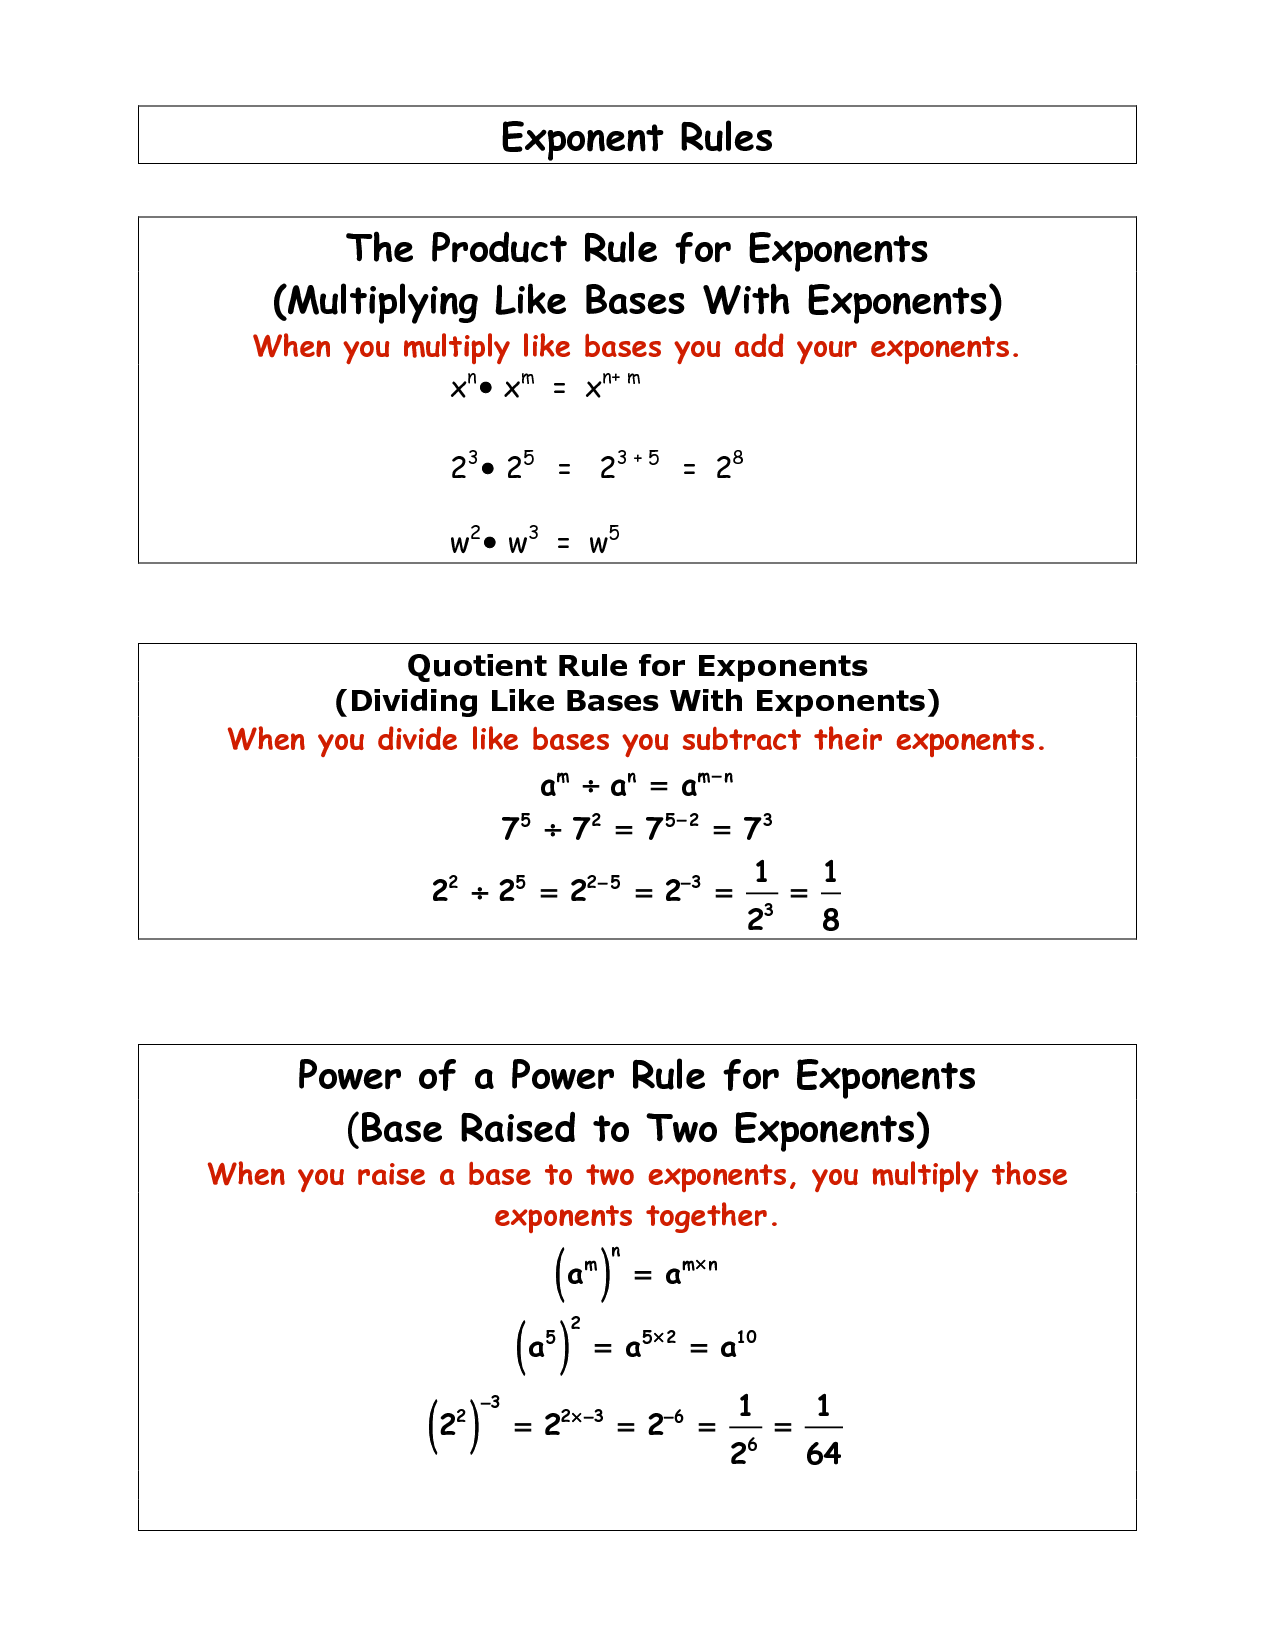 What is the way to multiply exponents with different bases?